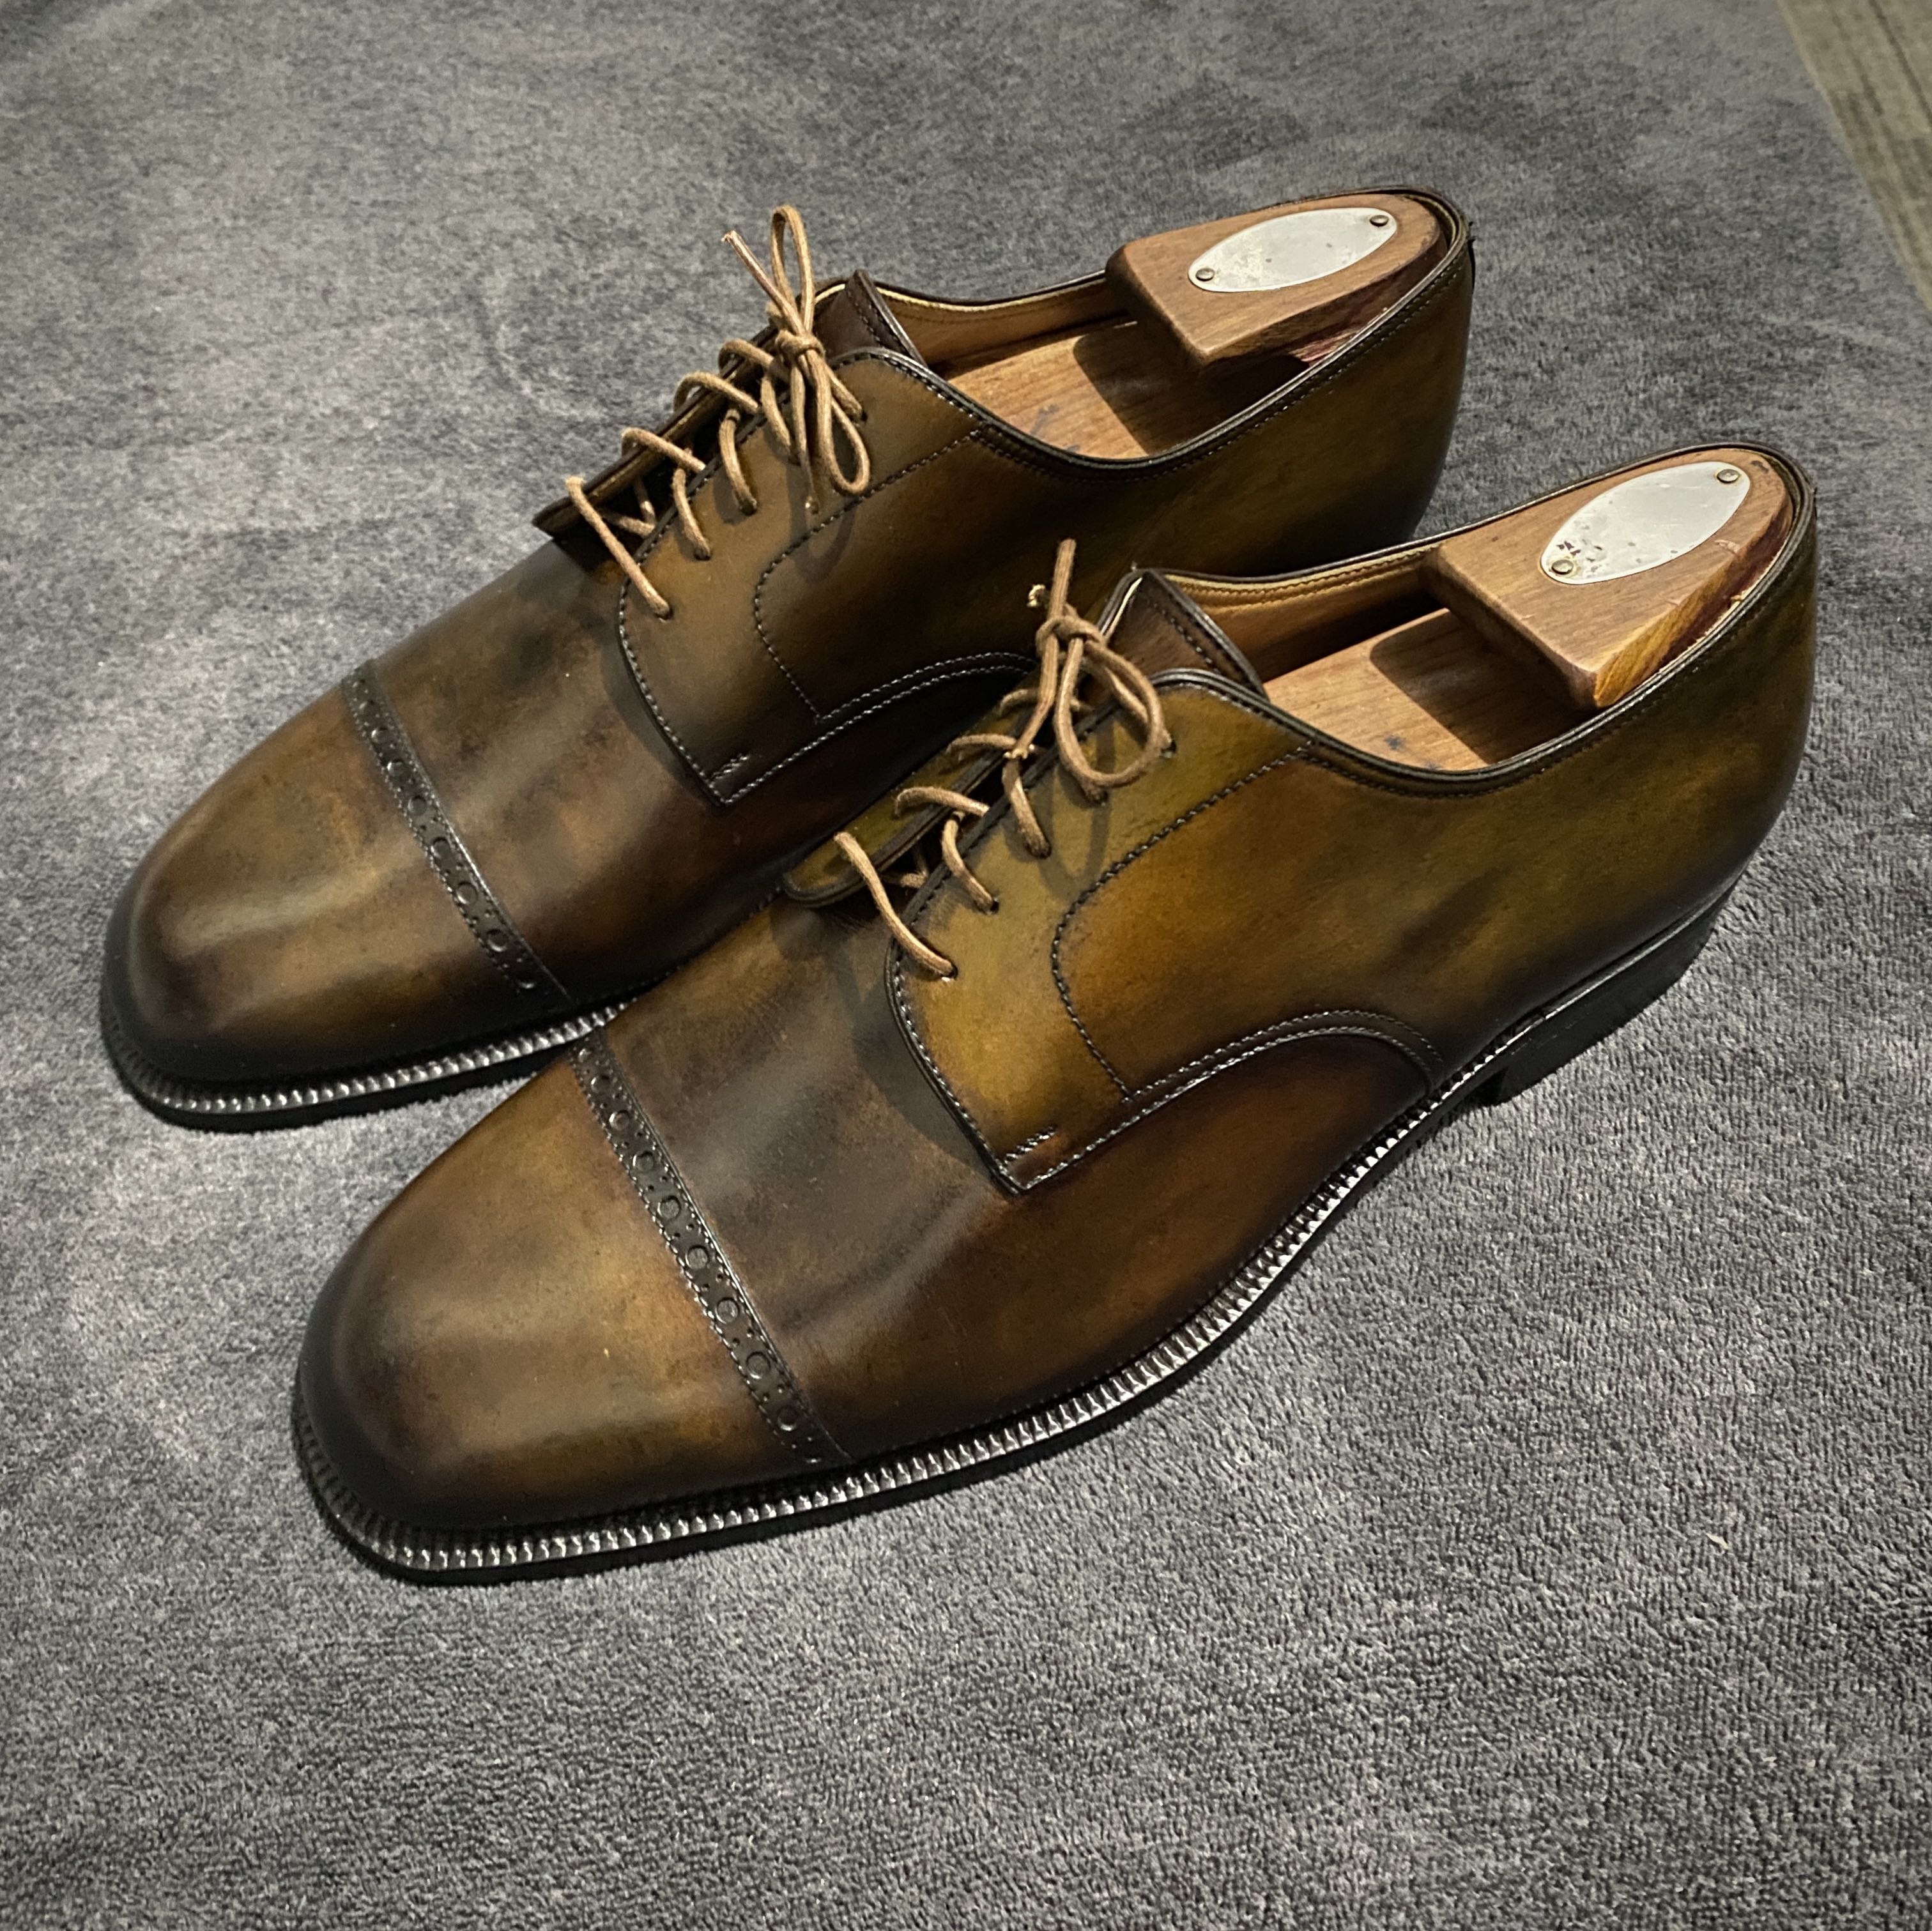 REPRICED! Antique Style custom patina Captoe Derby leather